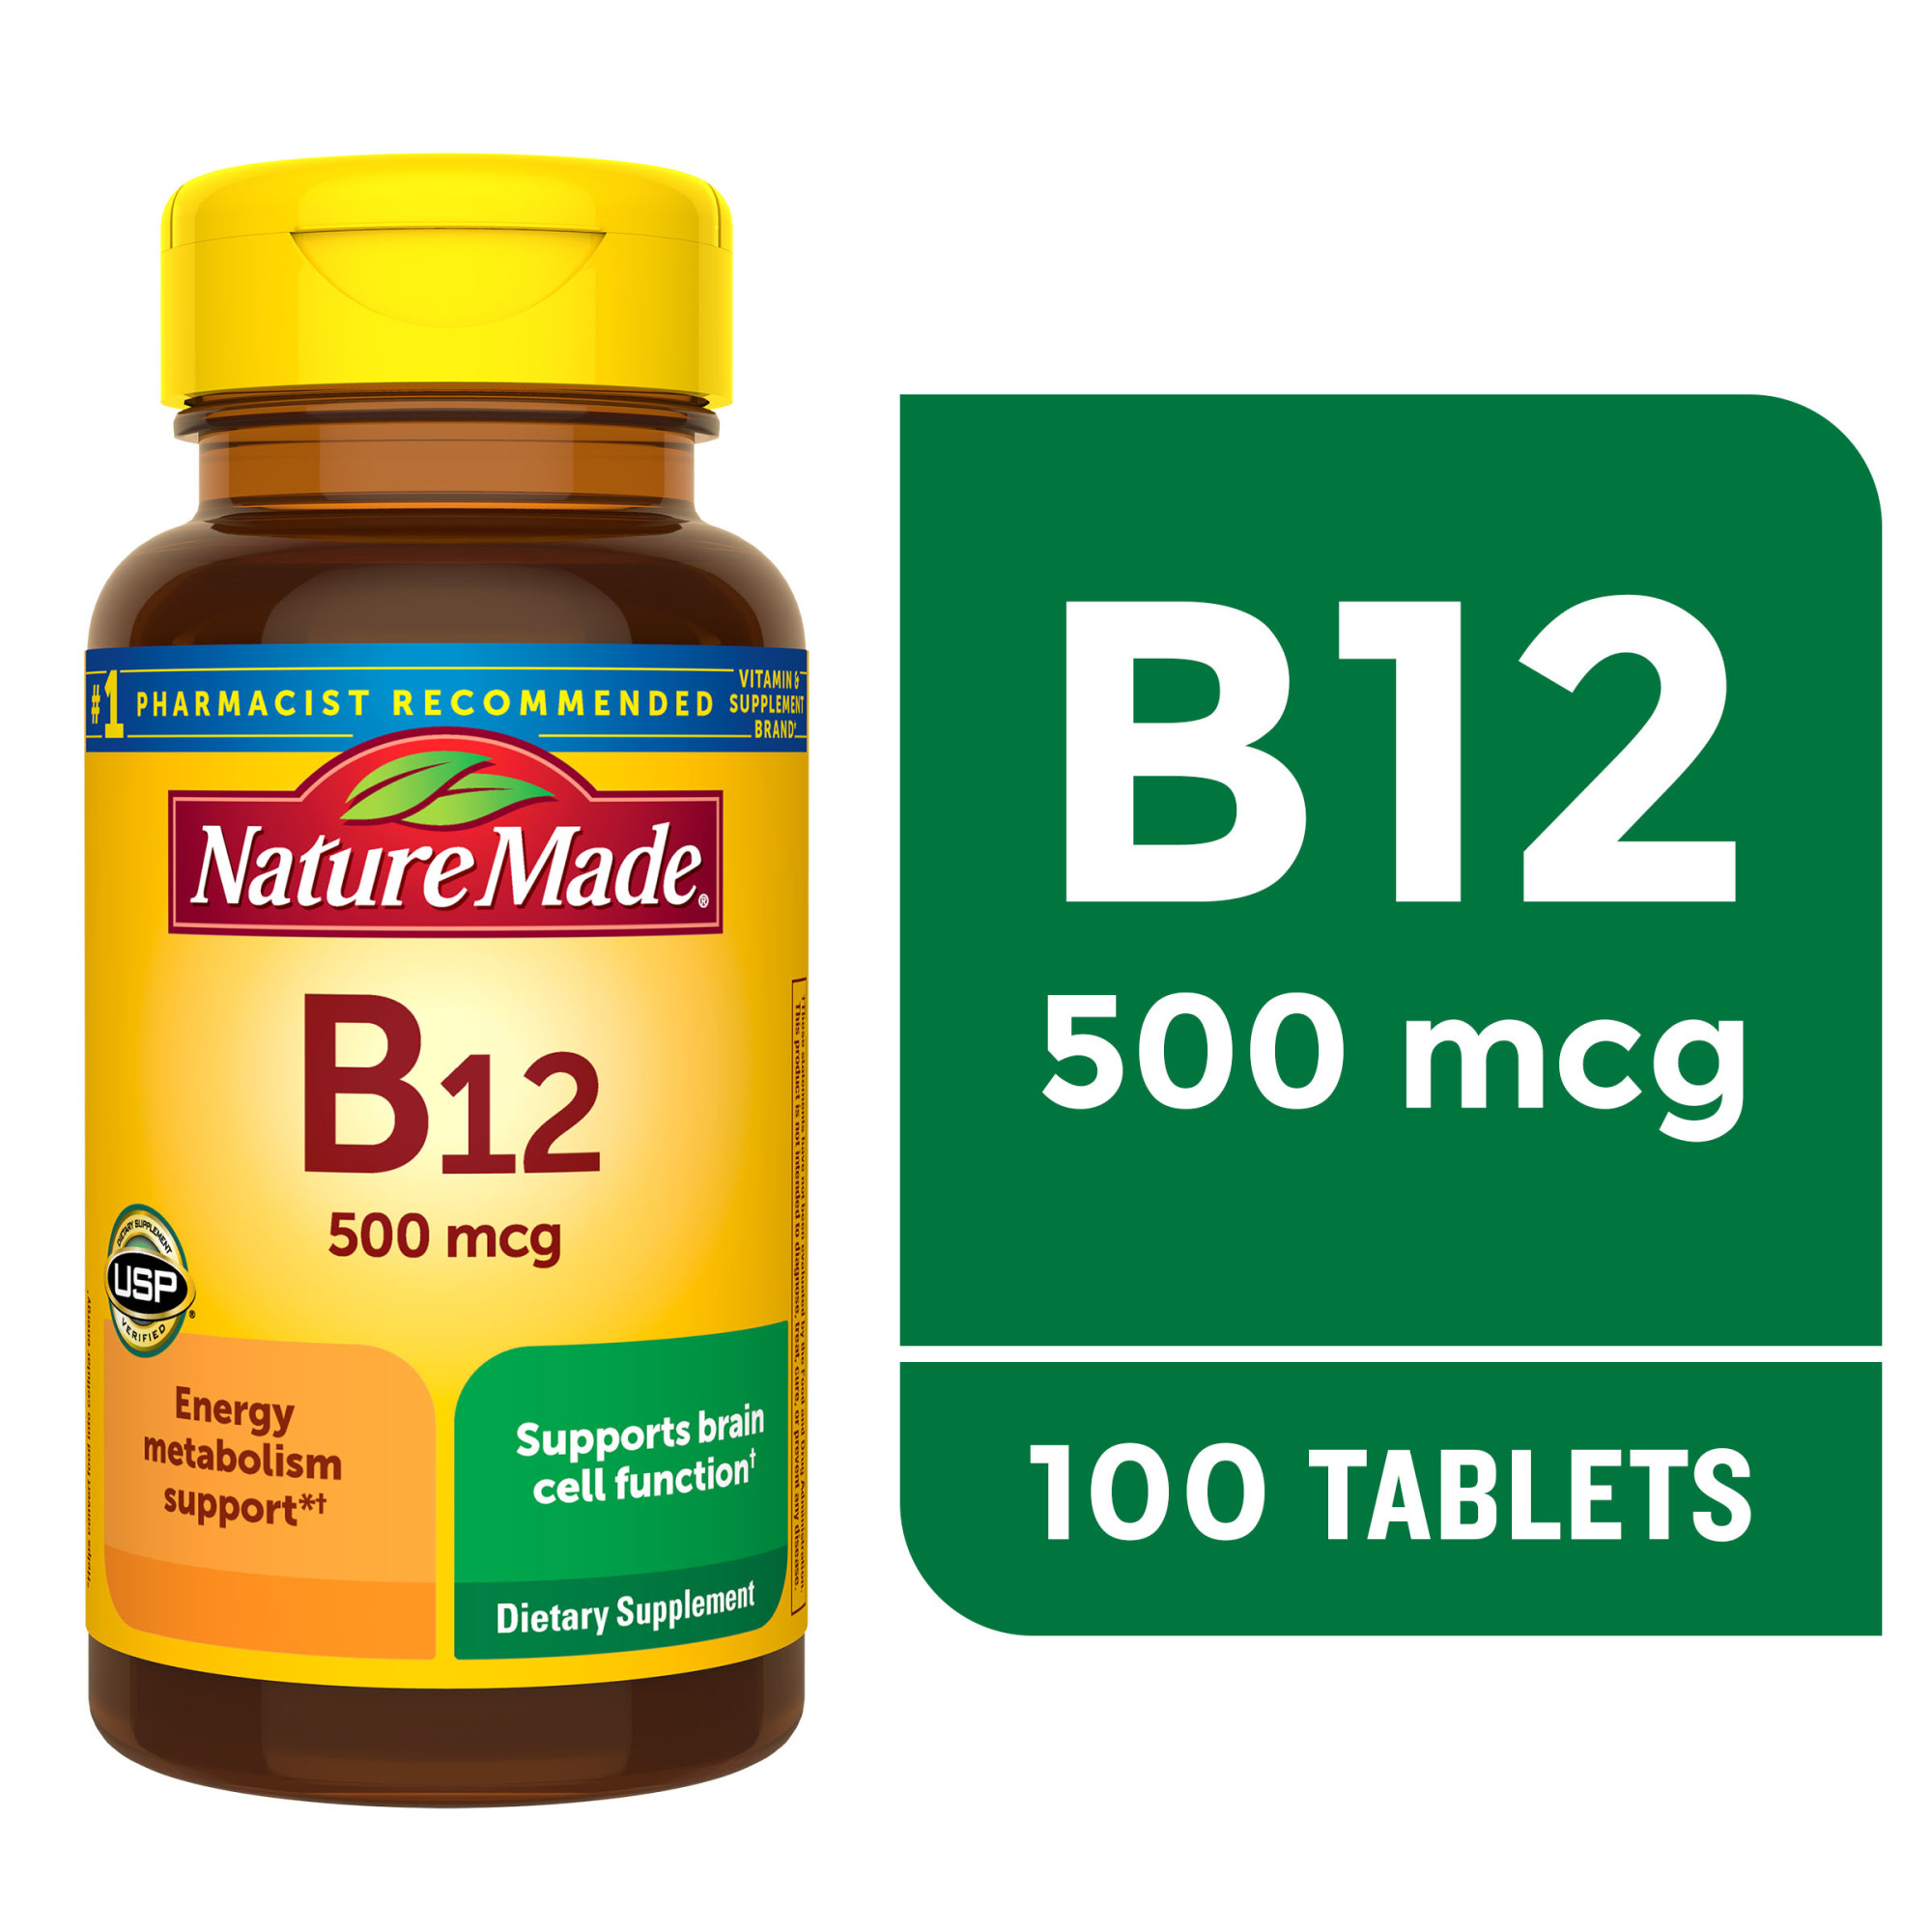 Nature Made Vitamin B12 500 mcg Tablets, Dietary Supplement, 100 Count - image 1 of 11